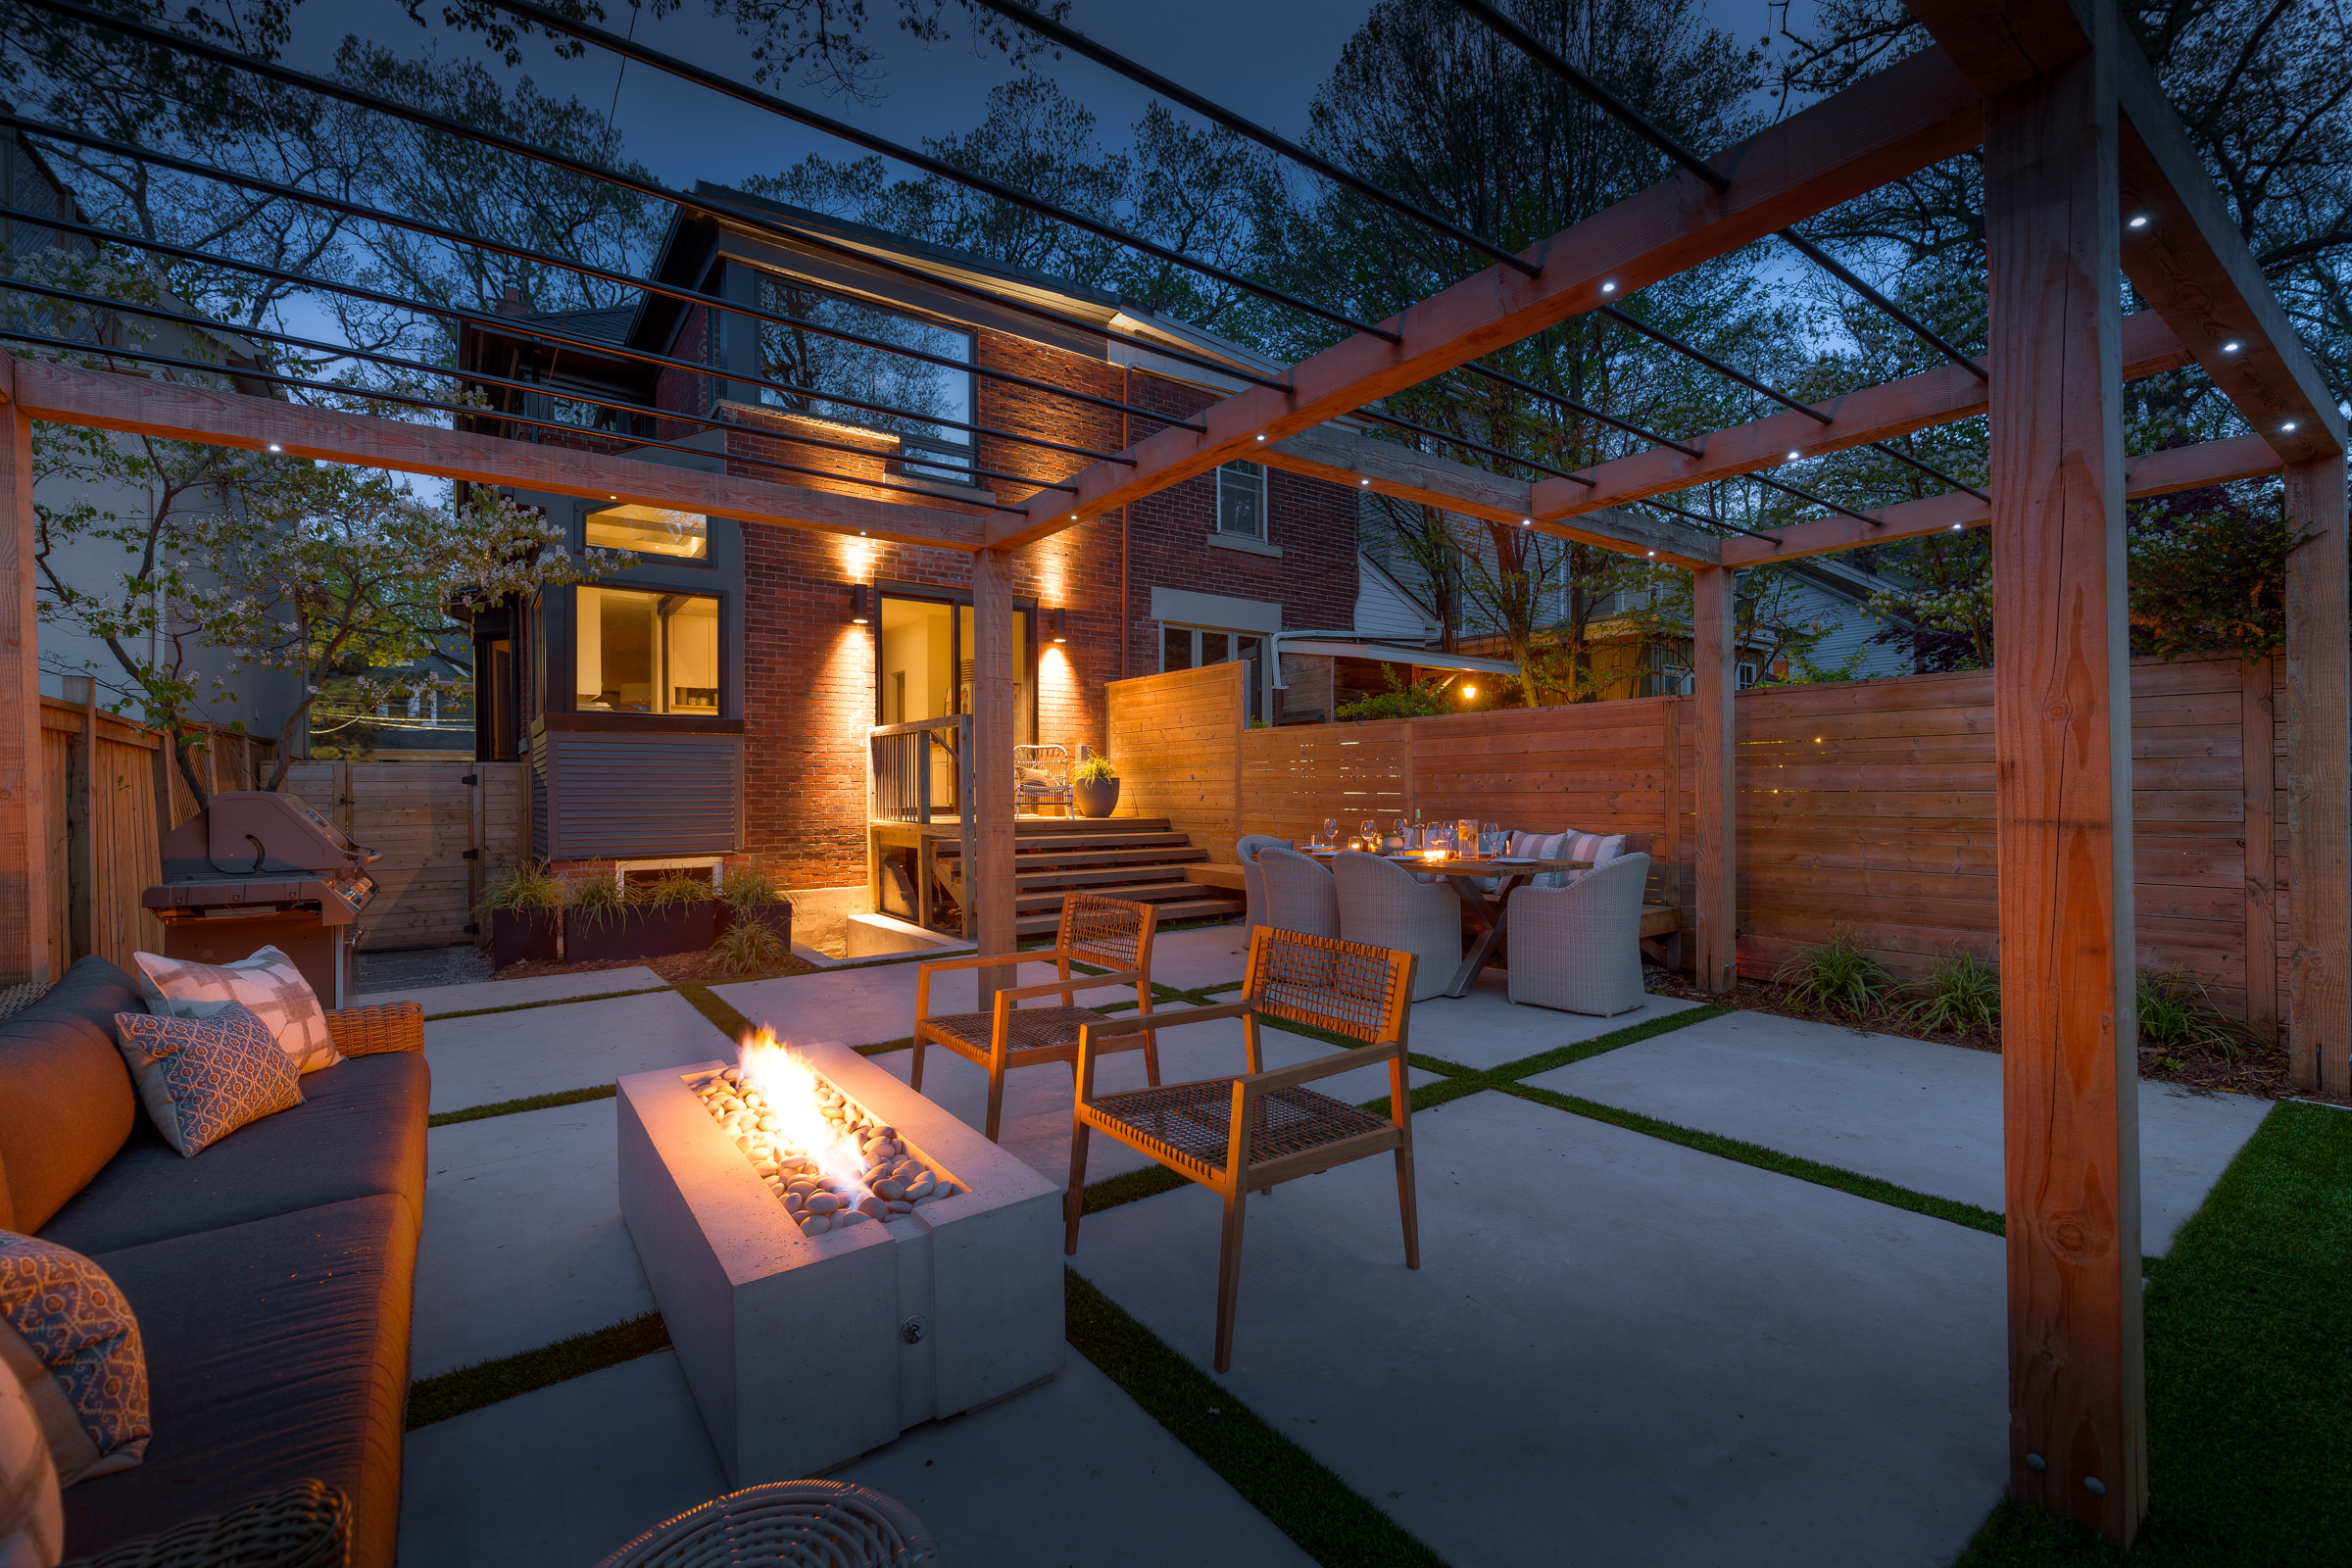 This outdoor space is pictured at dawn, with the rectangular fire pit lit. There is a couch and two chairs next to the fire with a wooden pergola above the seating area.